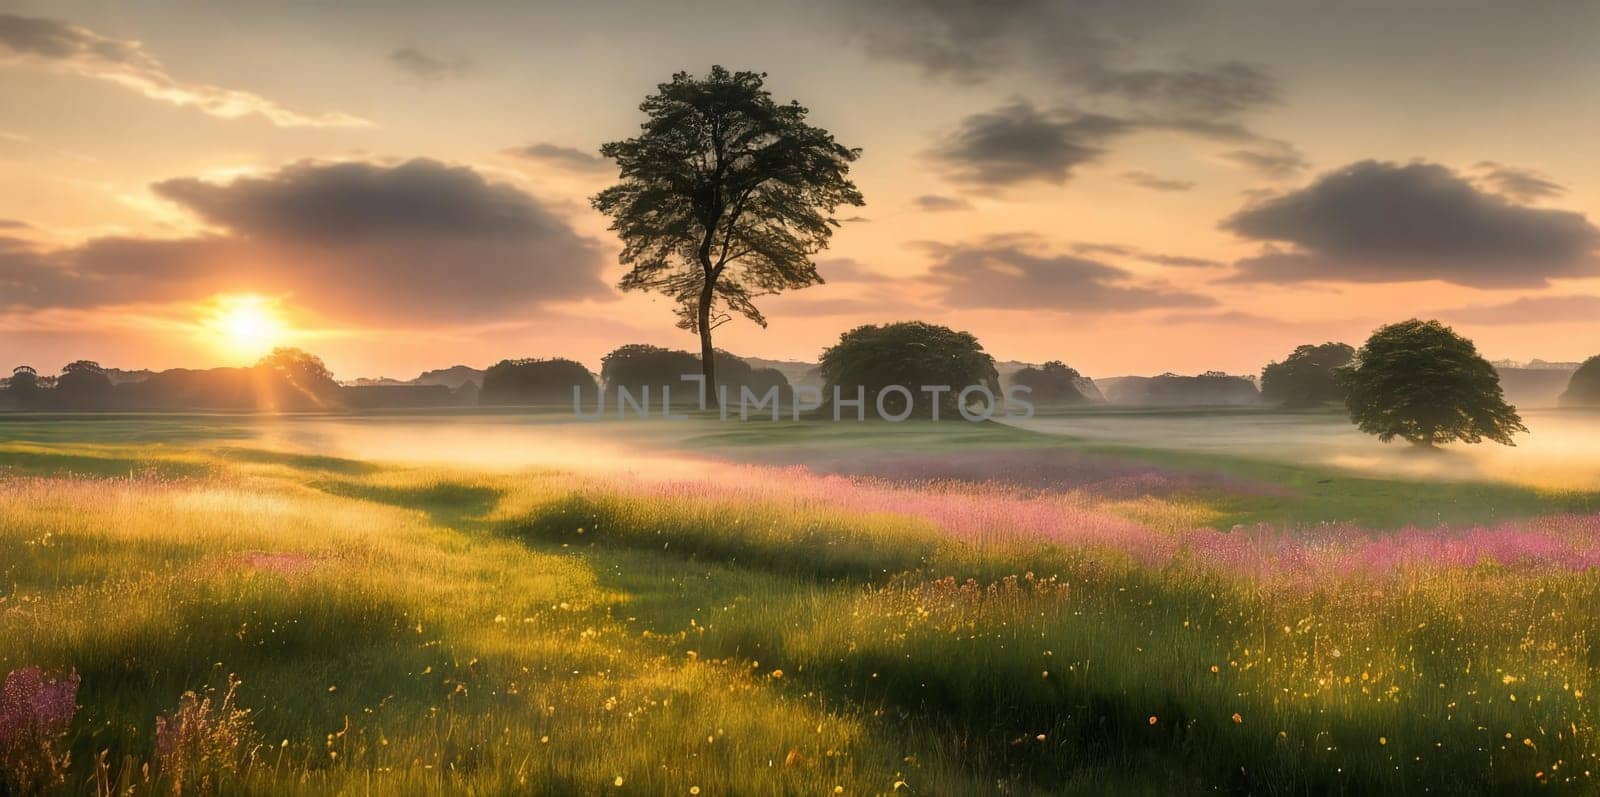 Peacefulness of a countryside meadow bathed in the soft light of dawn, with a gentle mist hovering over the grass adding a touch of mystique to the scene